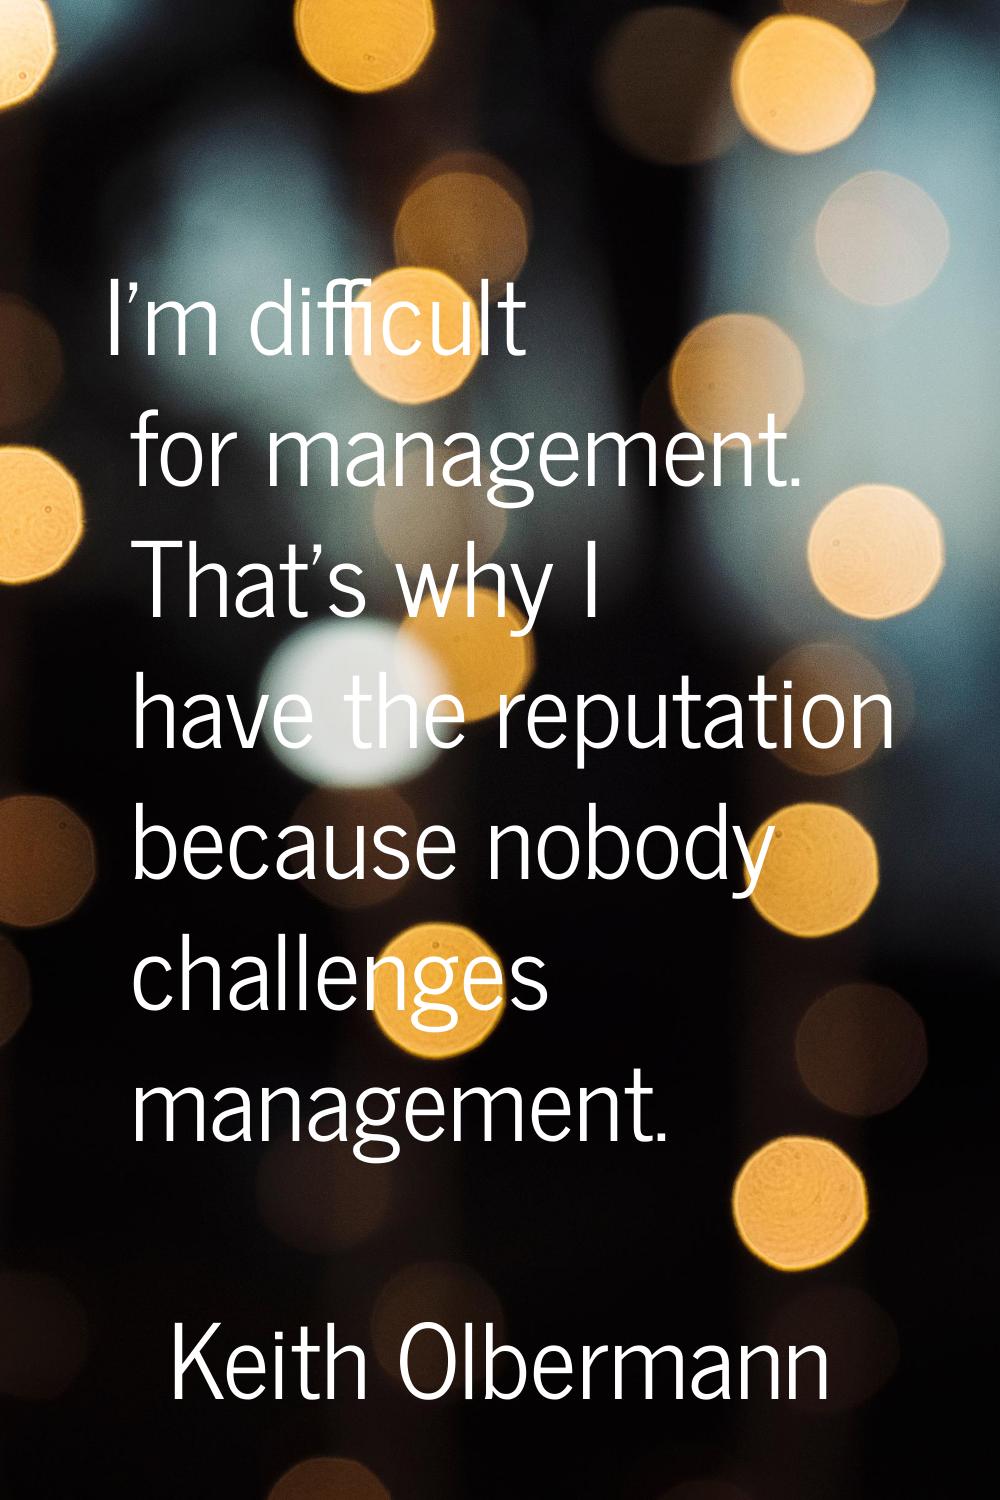 I'm difficult for management. That's why I have the reputation because nobody challenges management